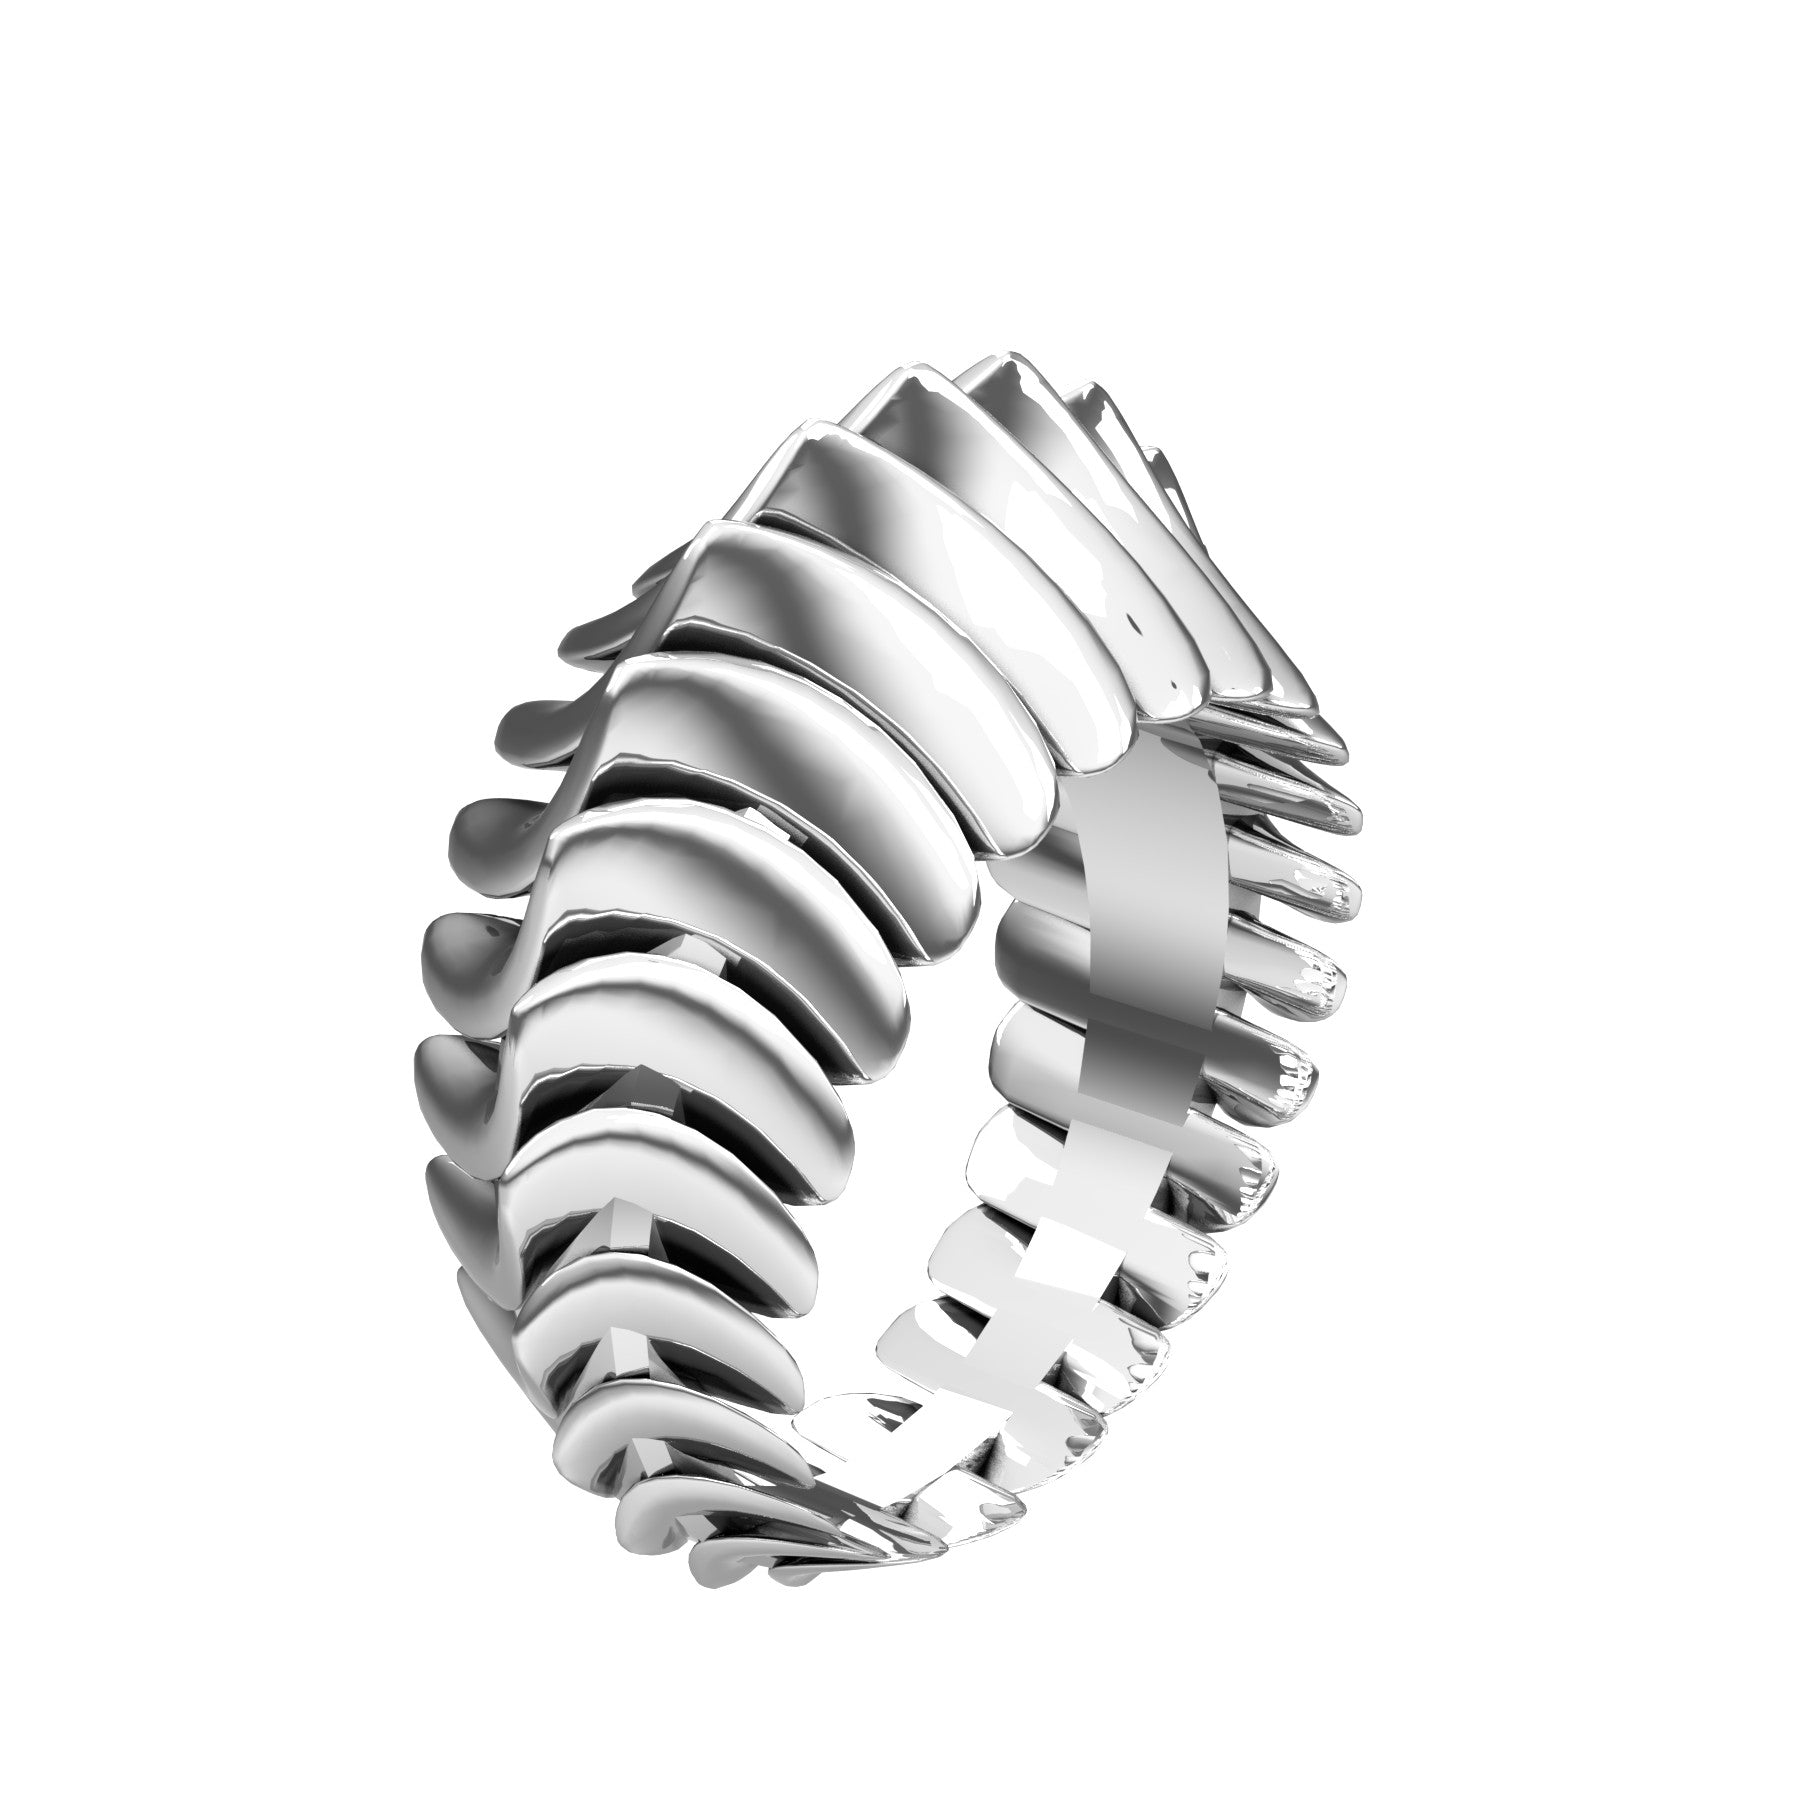 backbone ring, sterling silver, weight about 6,10 g. (0.21 oz), width 12,0 mm max